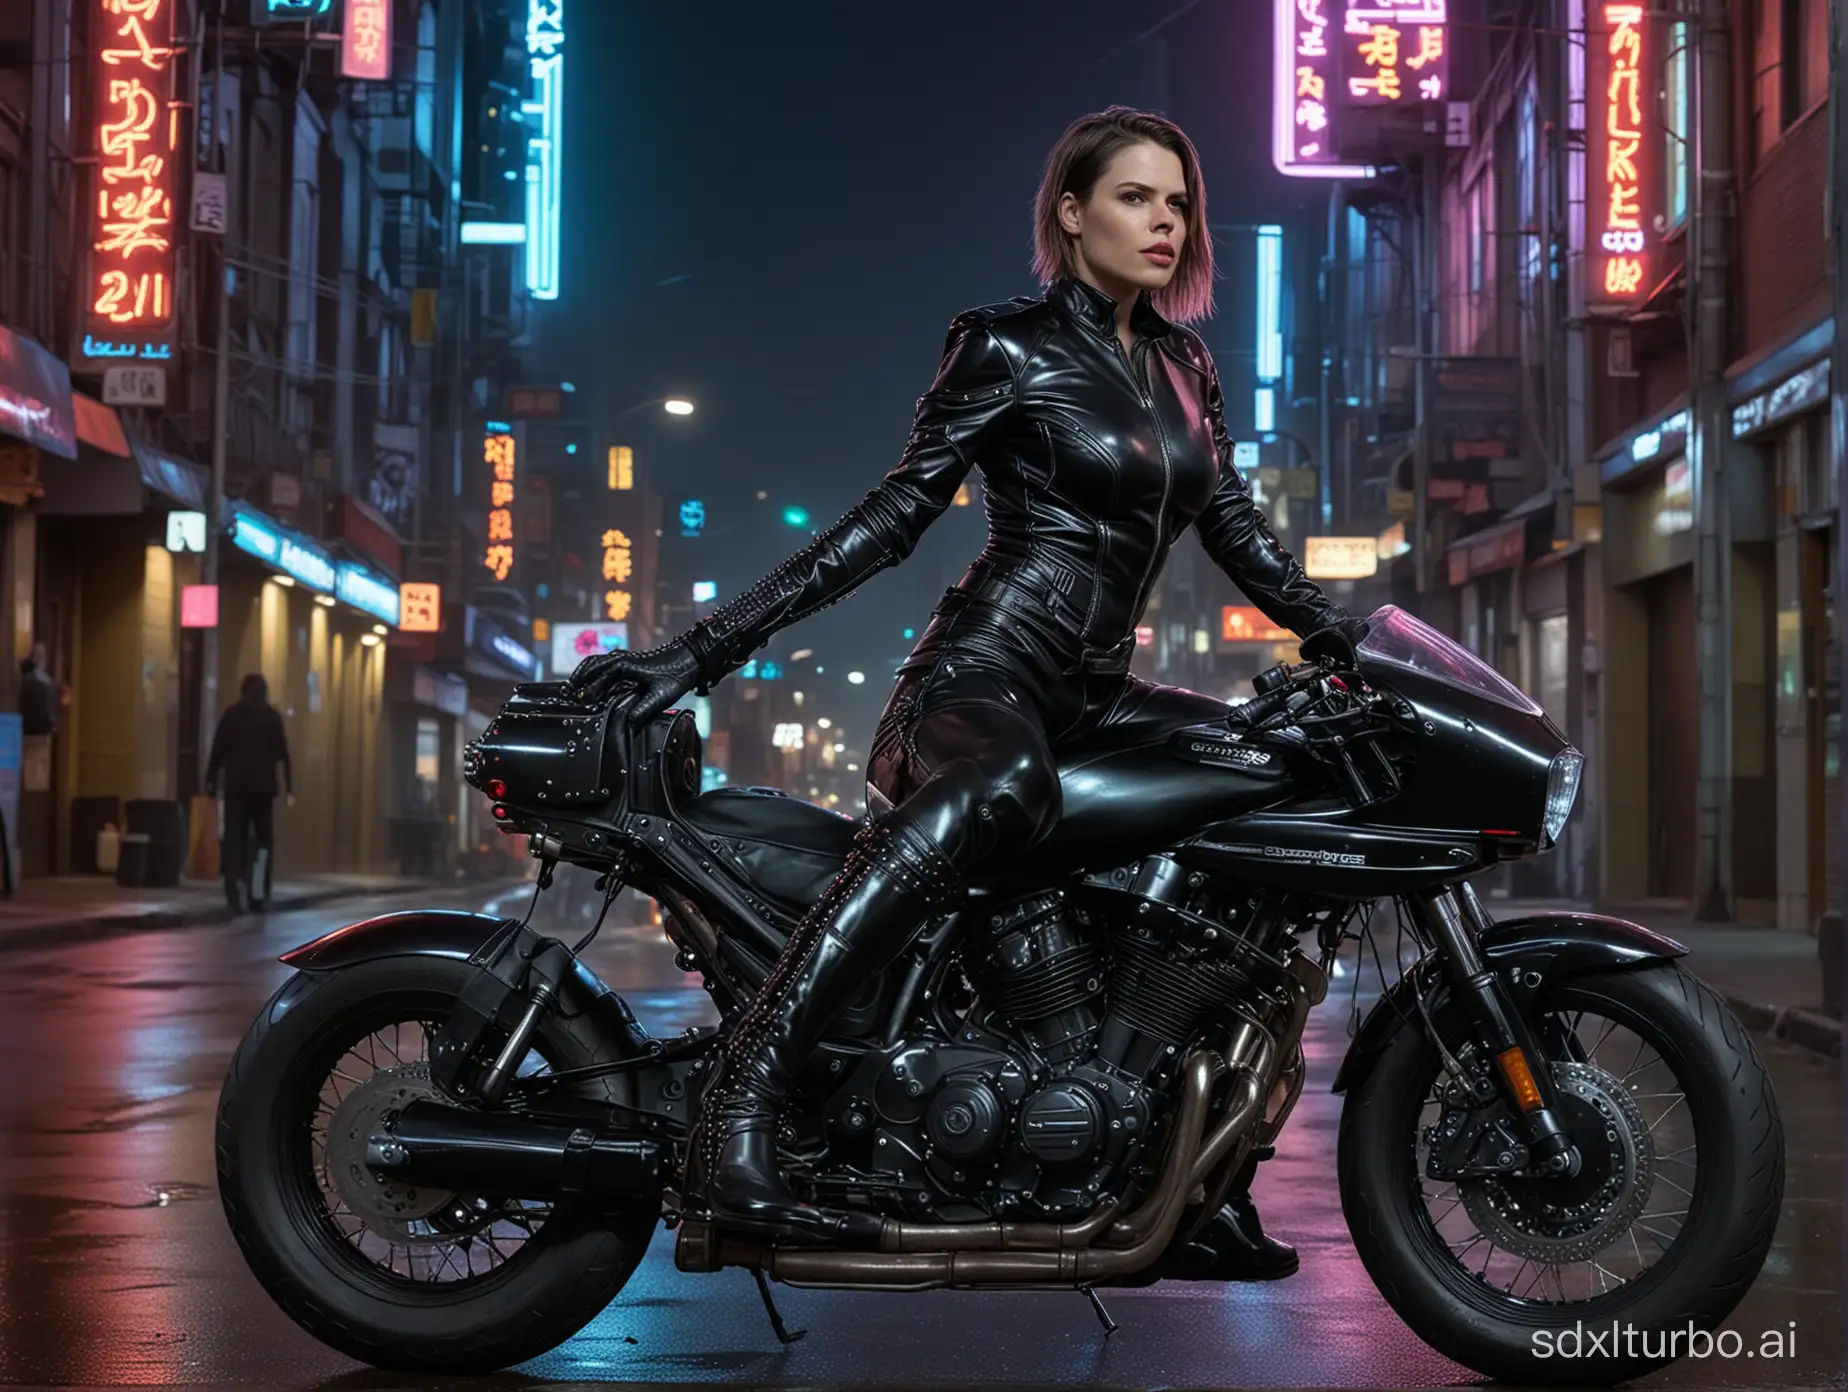 detailled hd photo , full-length framing , cyberpunk police woman Clea Duvall riding motor bike , wearing black low-cut shinny pvc catsuit , wearing long shiny pvc gloves , wearing shinny pvc thigh high boots , spikes and studs , in cyberpunk city at night  , inlighted by neon